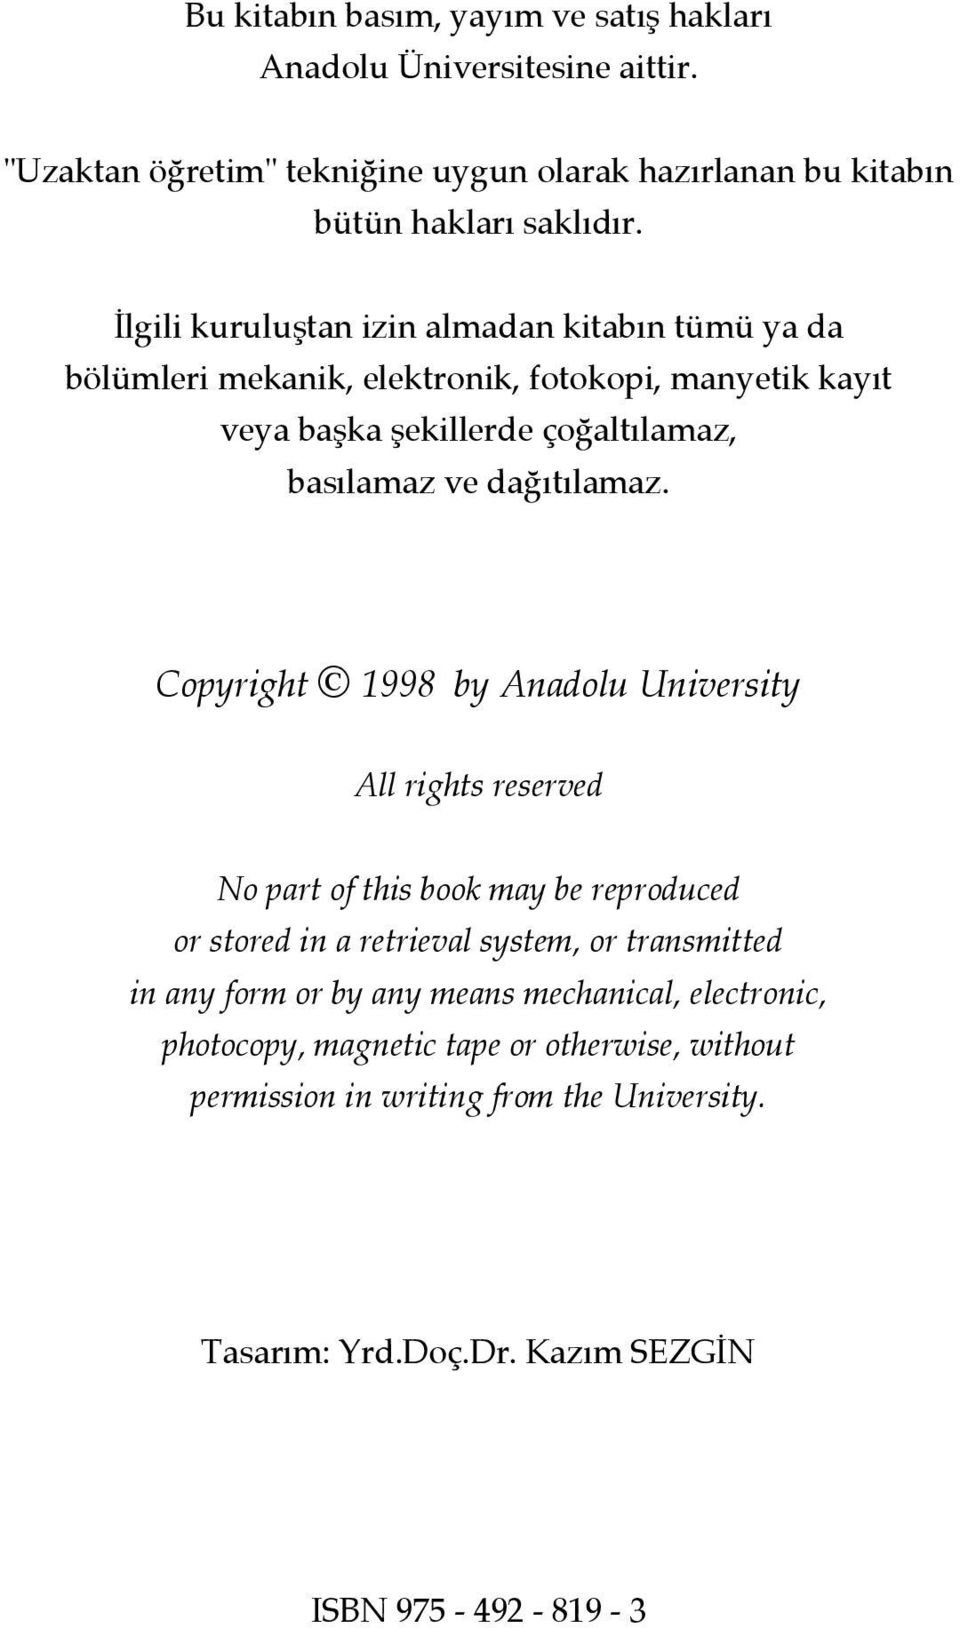 Copyright 1998 by Anadolu University All rights reserved No part of this book may be reproduced or stored in a retrieval system, or transmitted in any form or by any